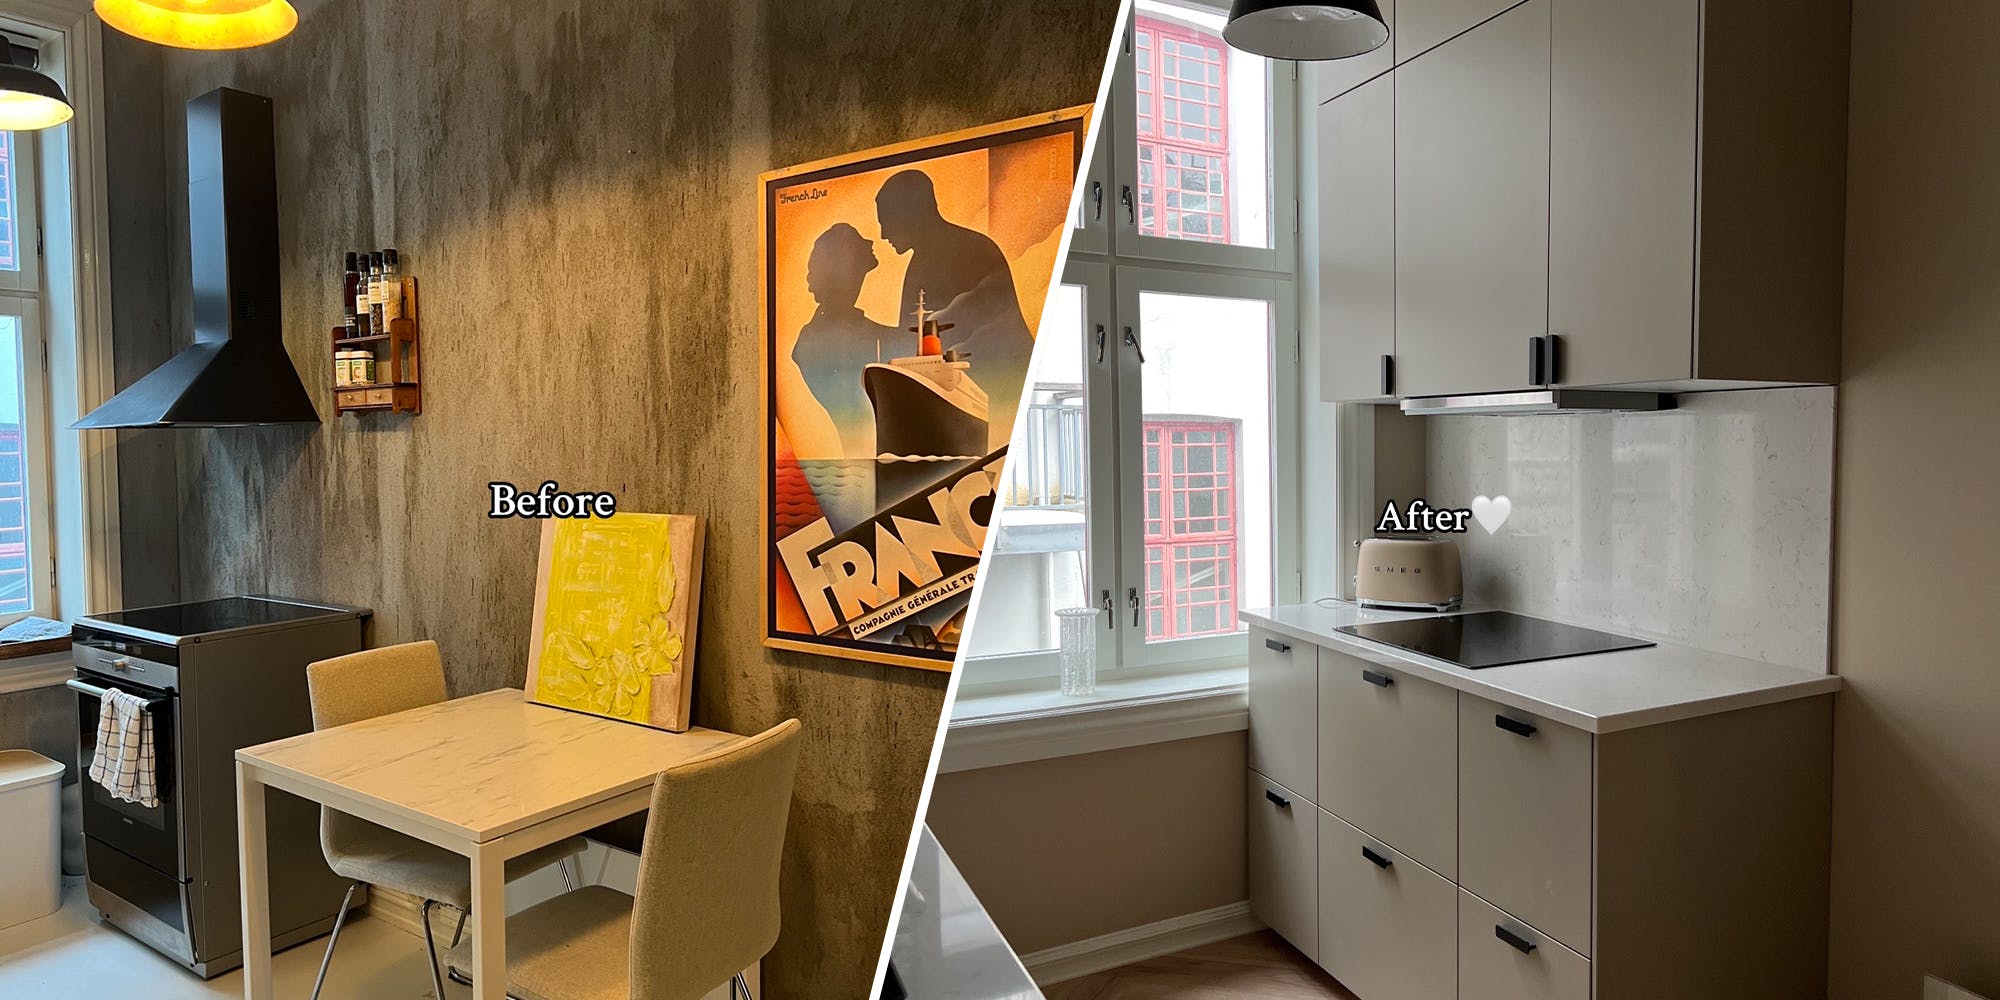 ‘His soul is no longer in that space’: Girlfriend redecorates her boyfriend’s apartment in ‘millennial beige’